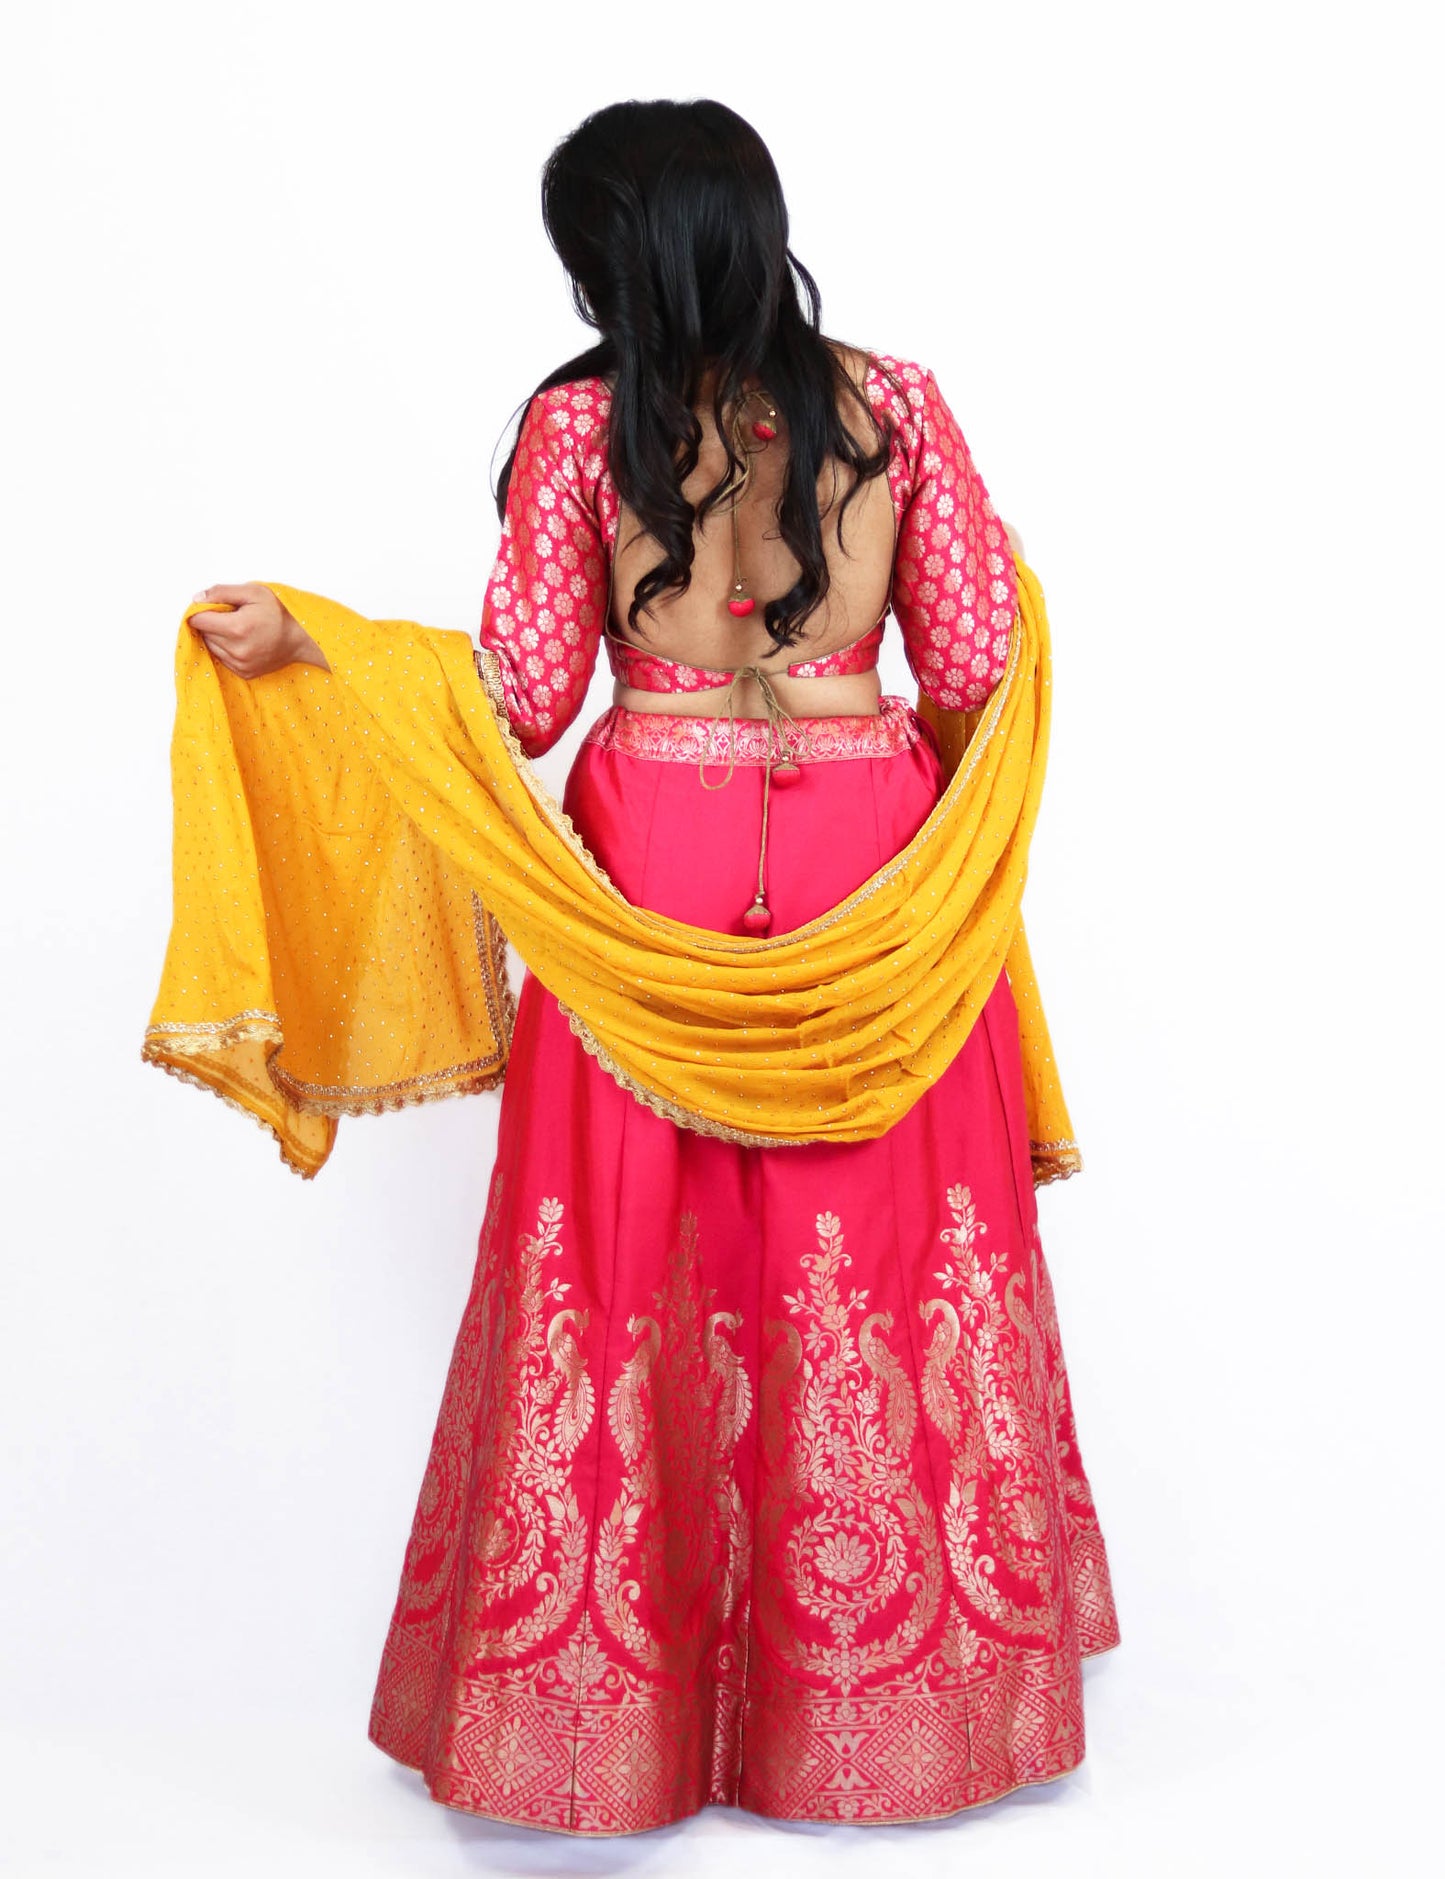 Rent Pink Brocade Lehenga & Embroidered Blouse With Yellow Dupatta